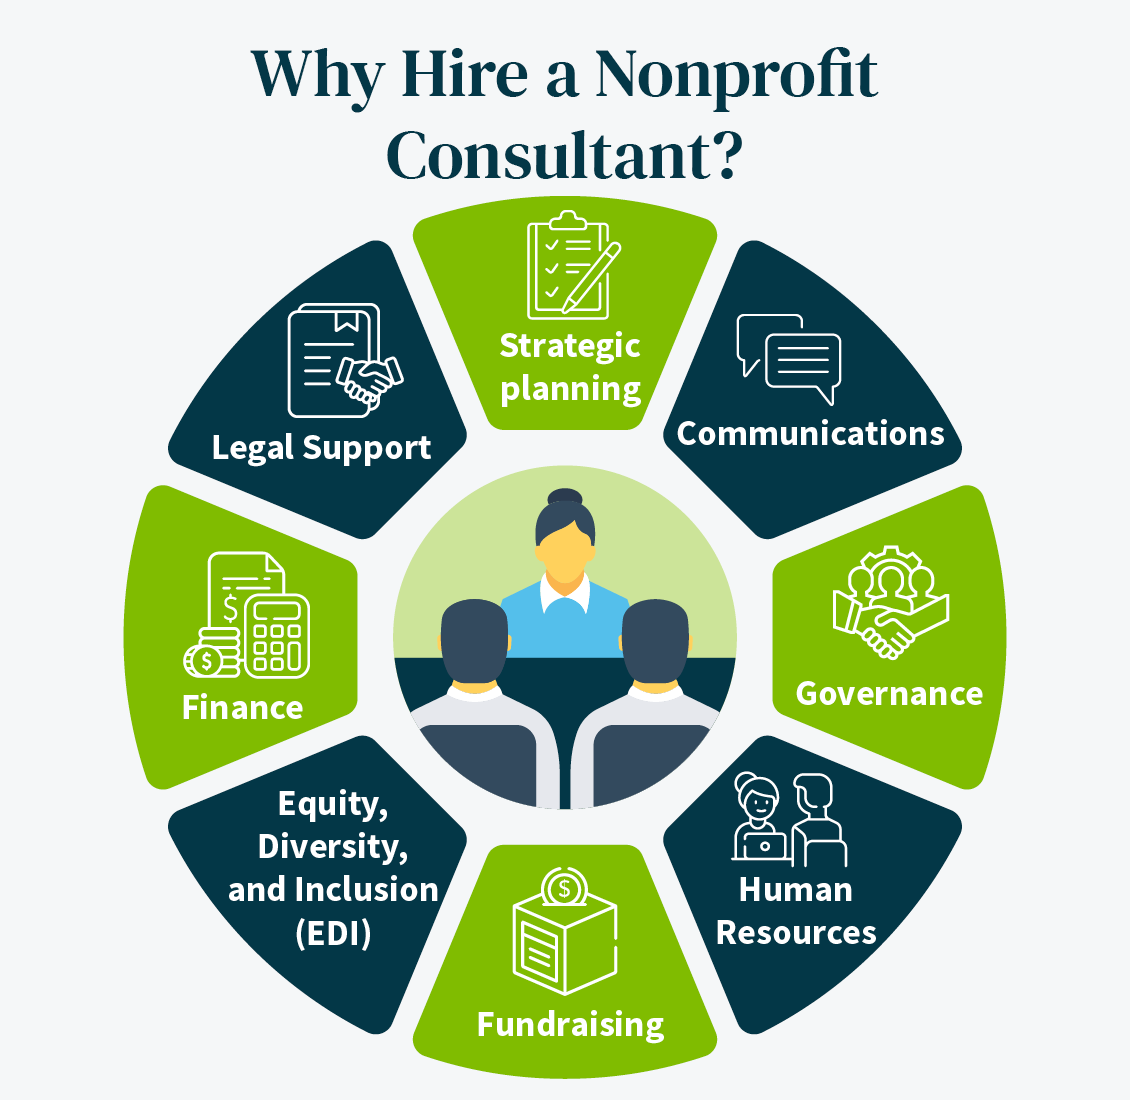 Various reasons to hire a nonprofit consultant, discussed below.